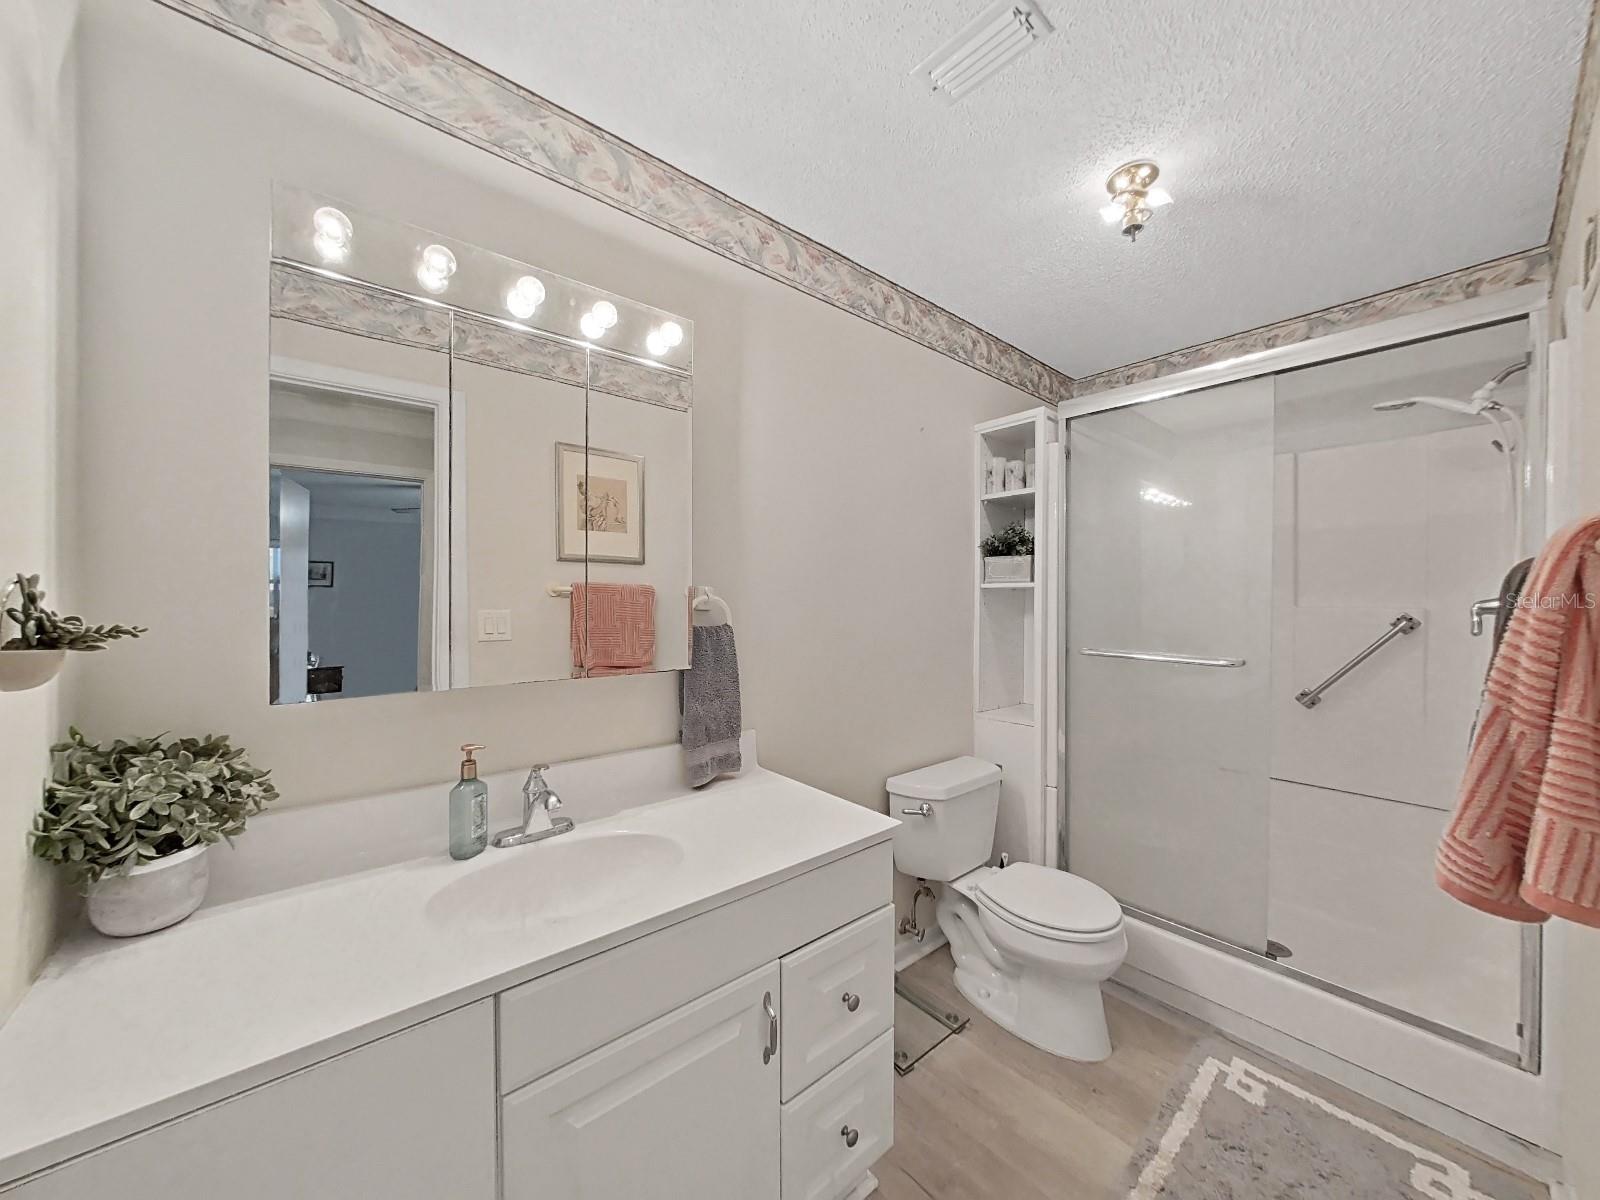 The bath open with a walk-in shower!